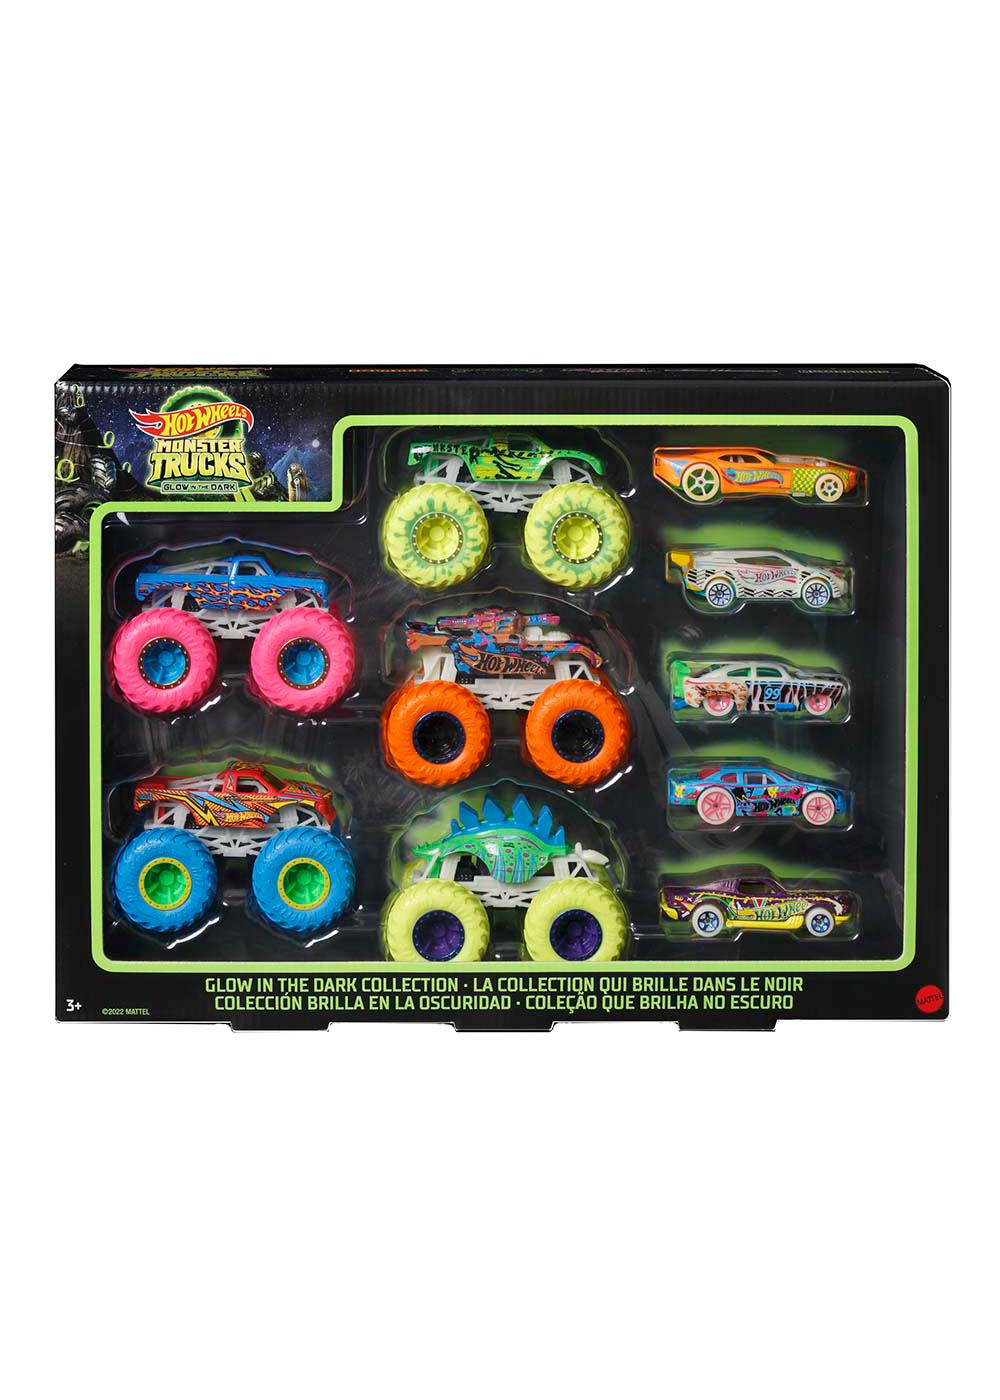 Buy Hot Wheels Colour Reveal Vehicle 2-Pack Assortment, Toy cars and  trucks